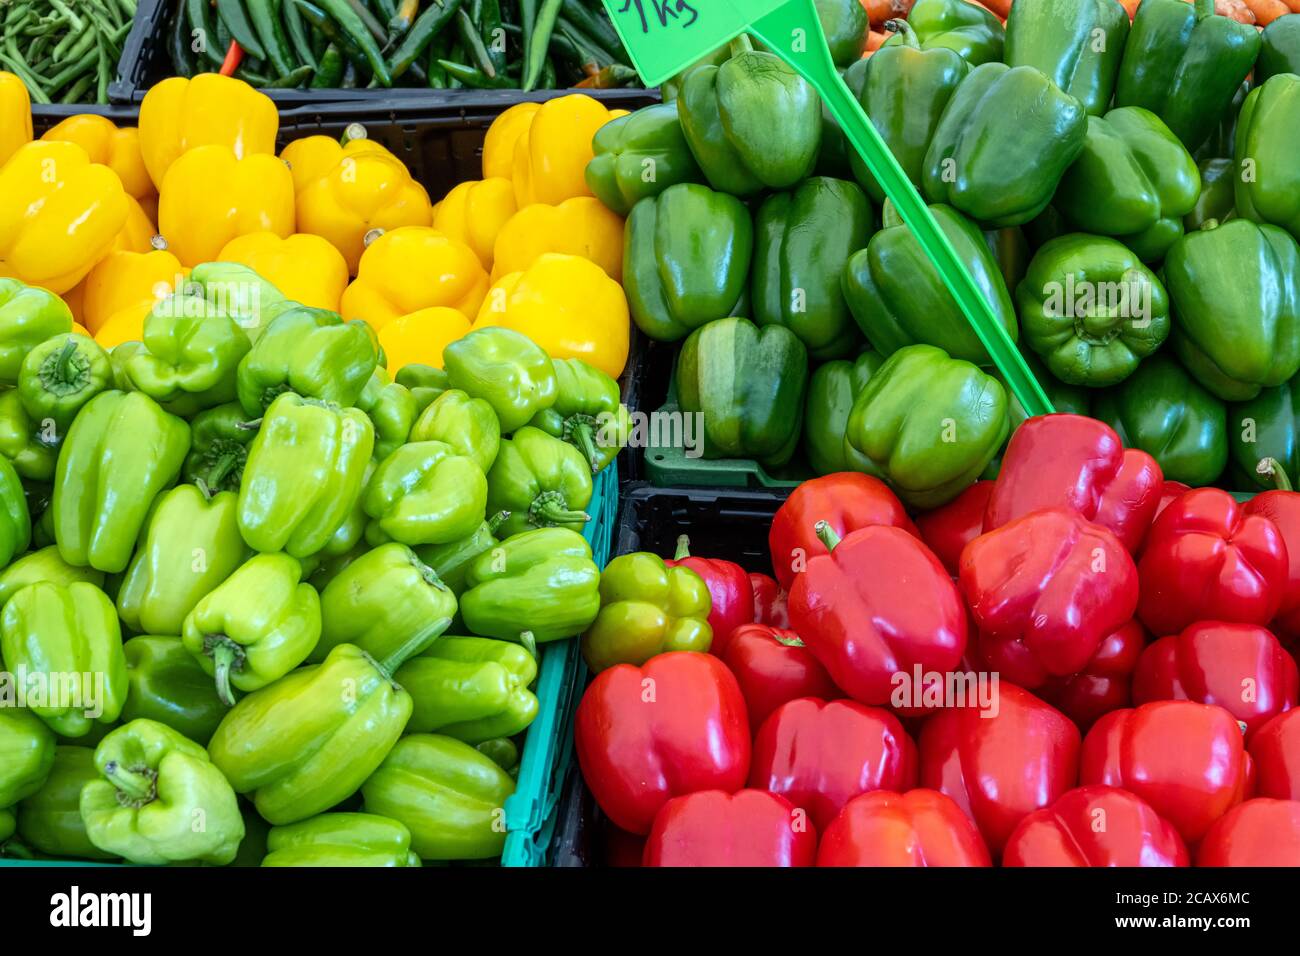 Colorful bell peppers for sale at a market Stock Photo